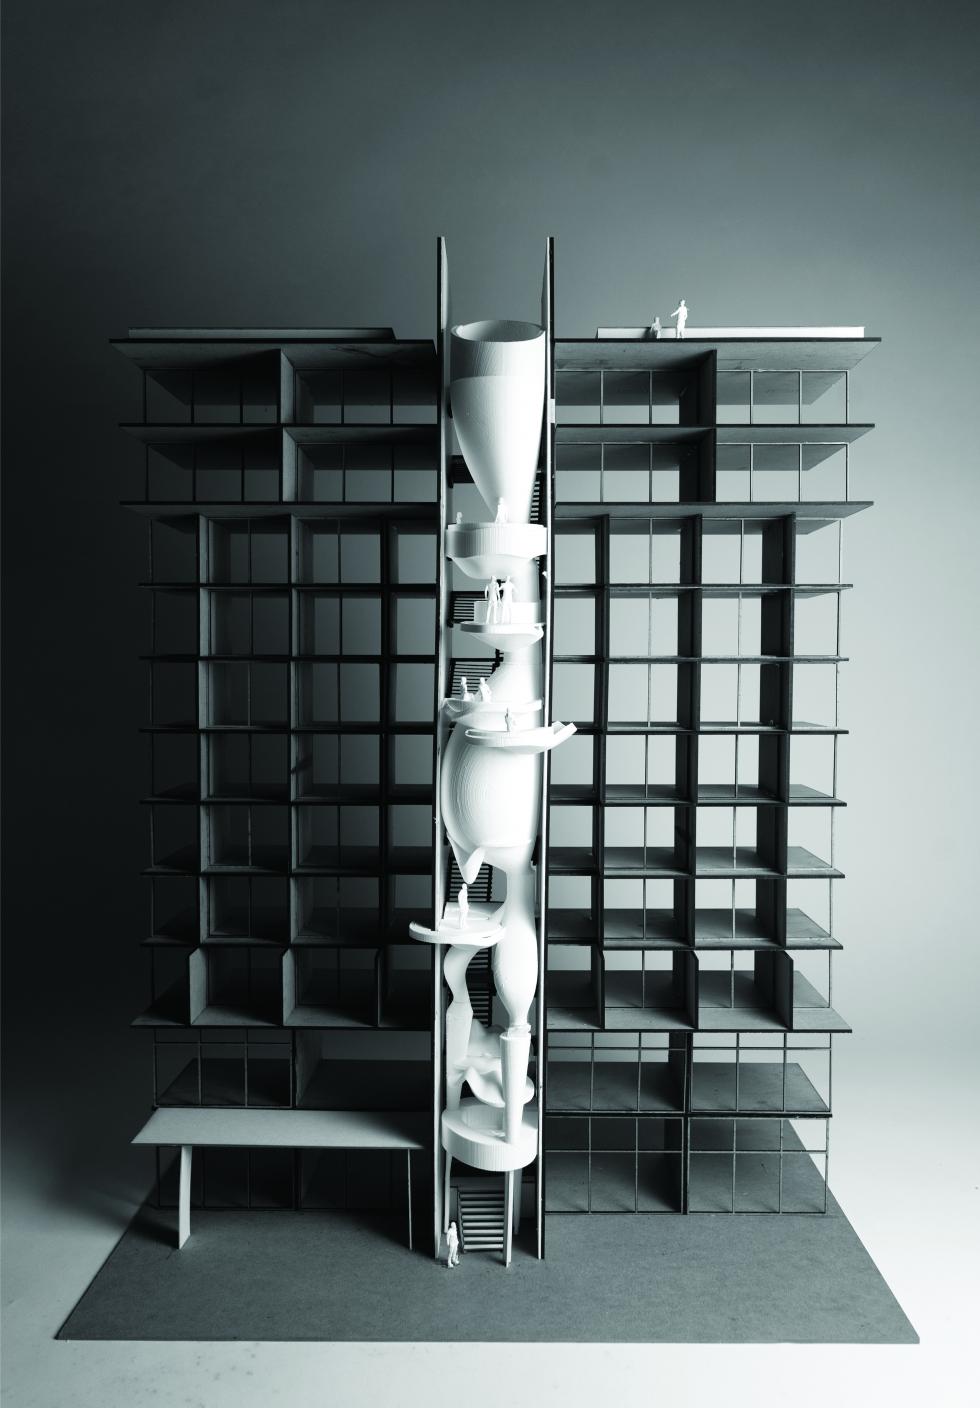 Overall model showing building infrastructure with curvy tower holding the water.